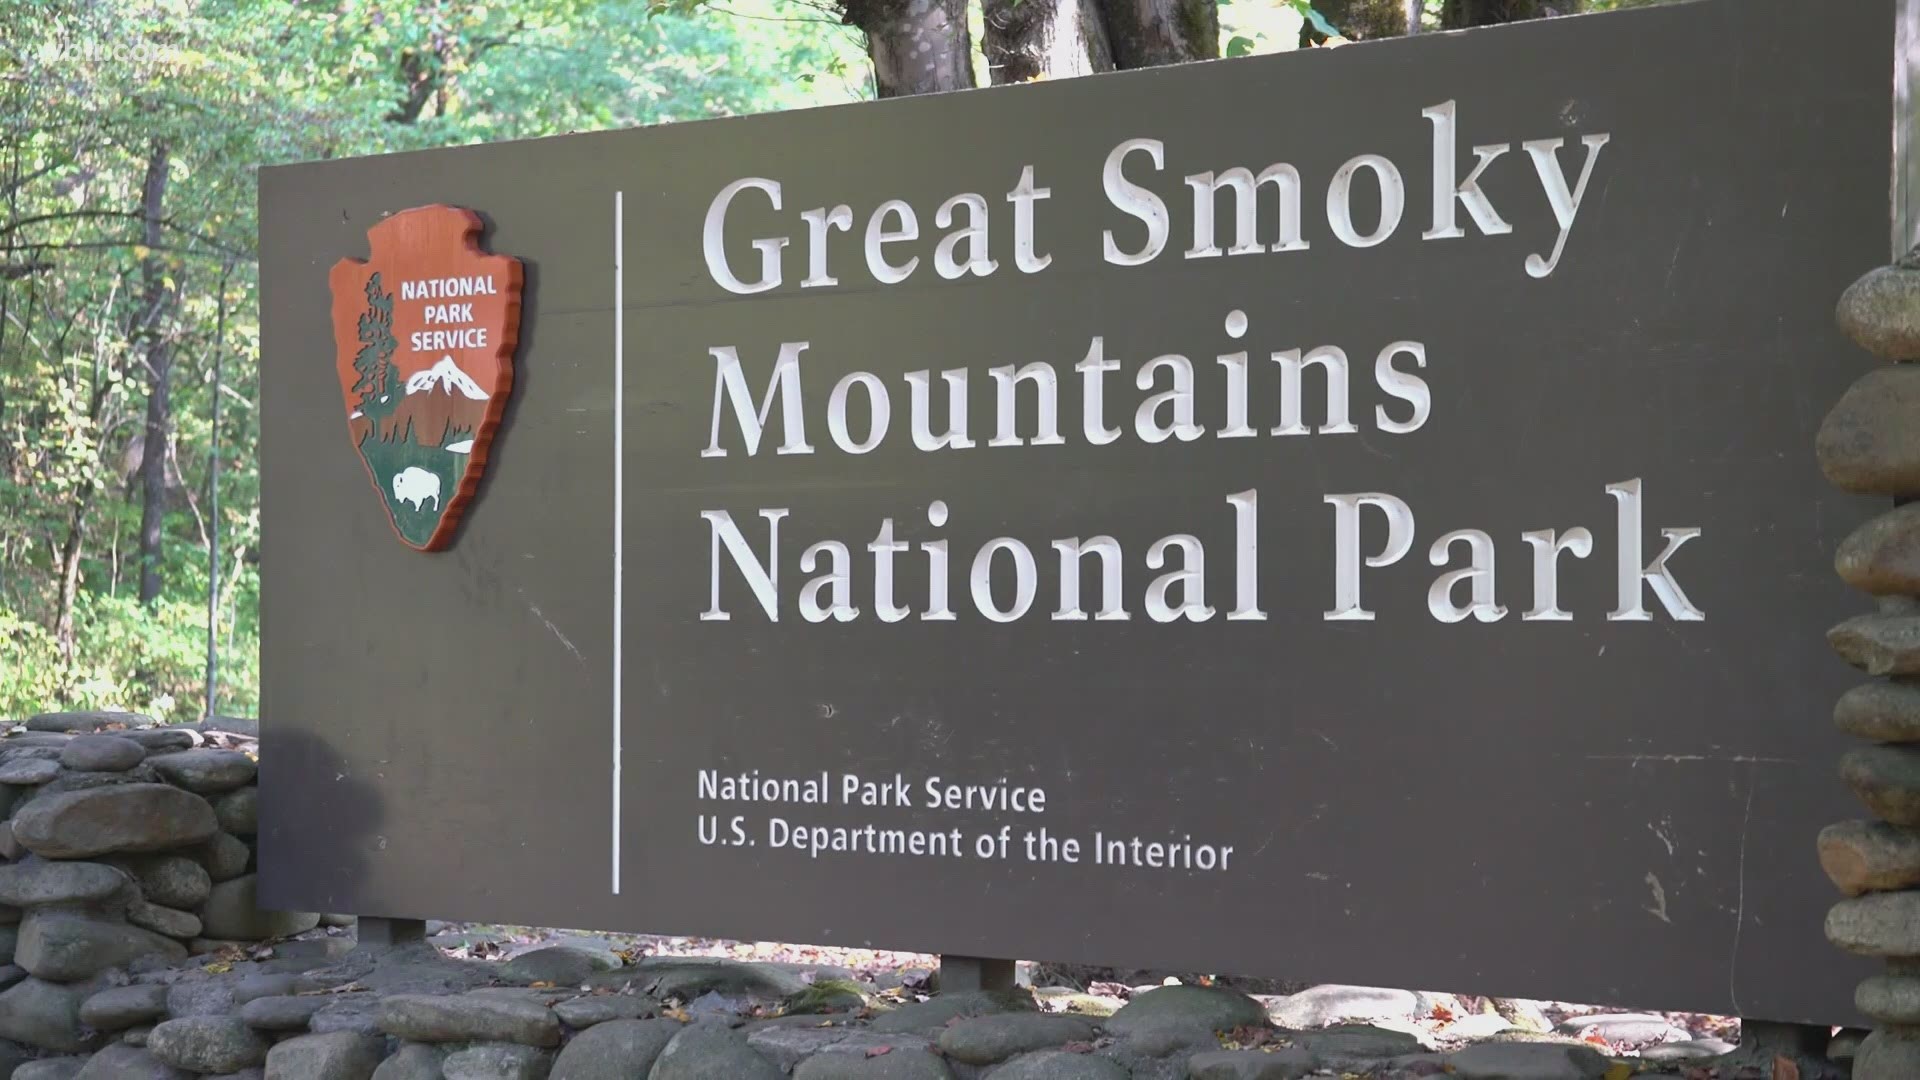 Tuesday marked the 87th birthday of the formal opening of Great Smoky Mountains National Park.